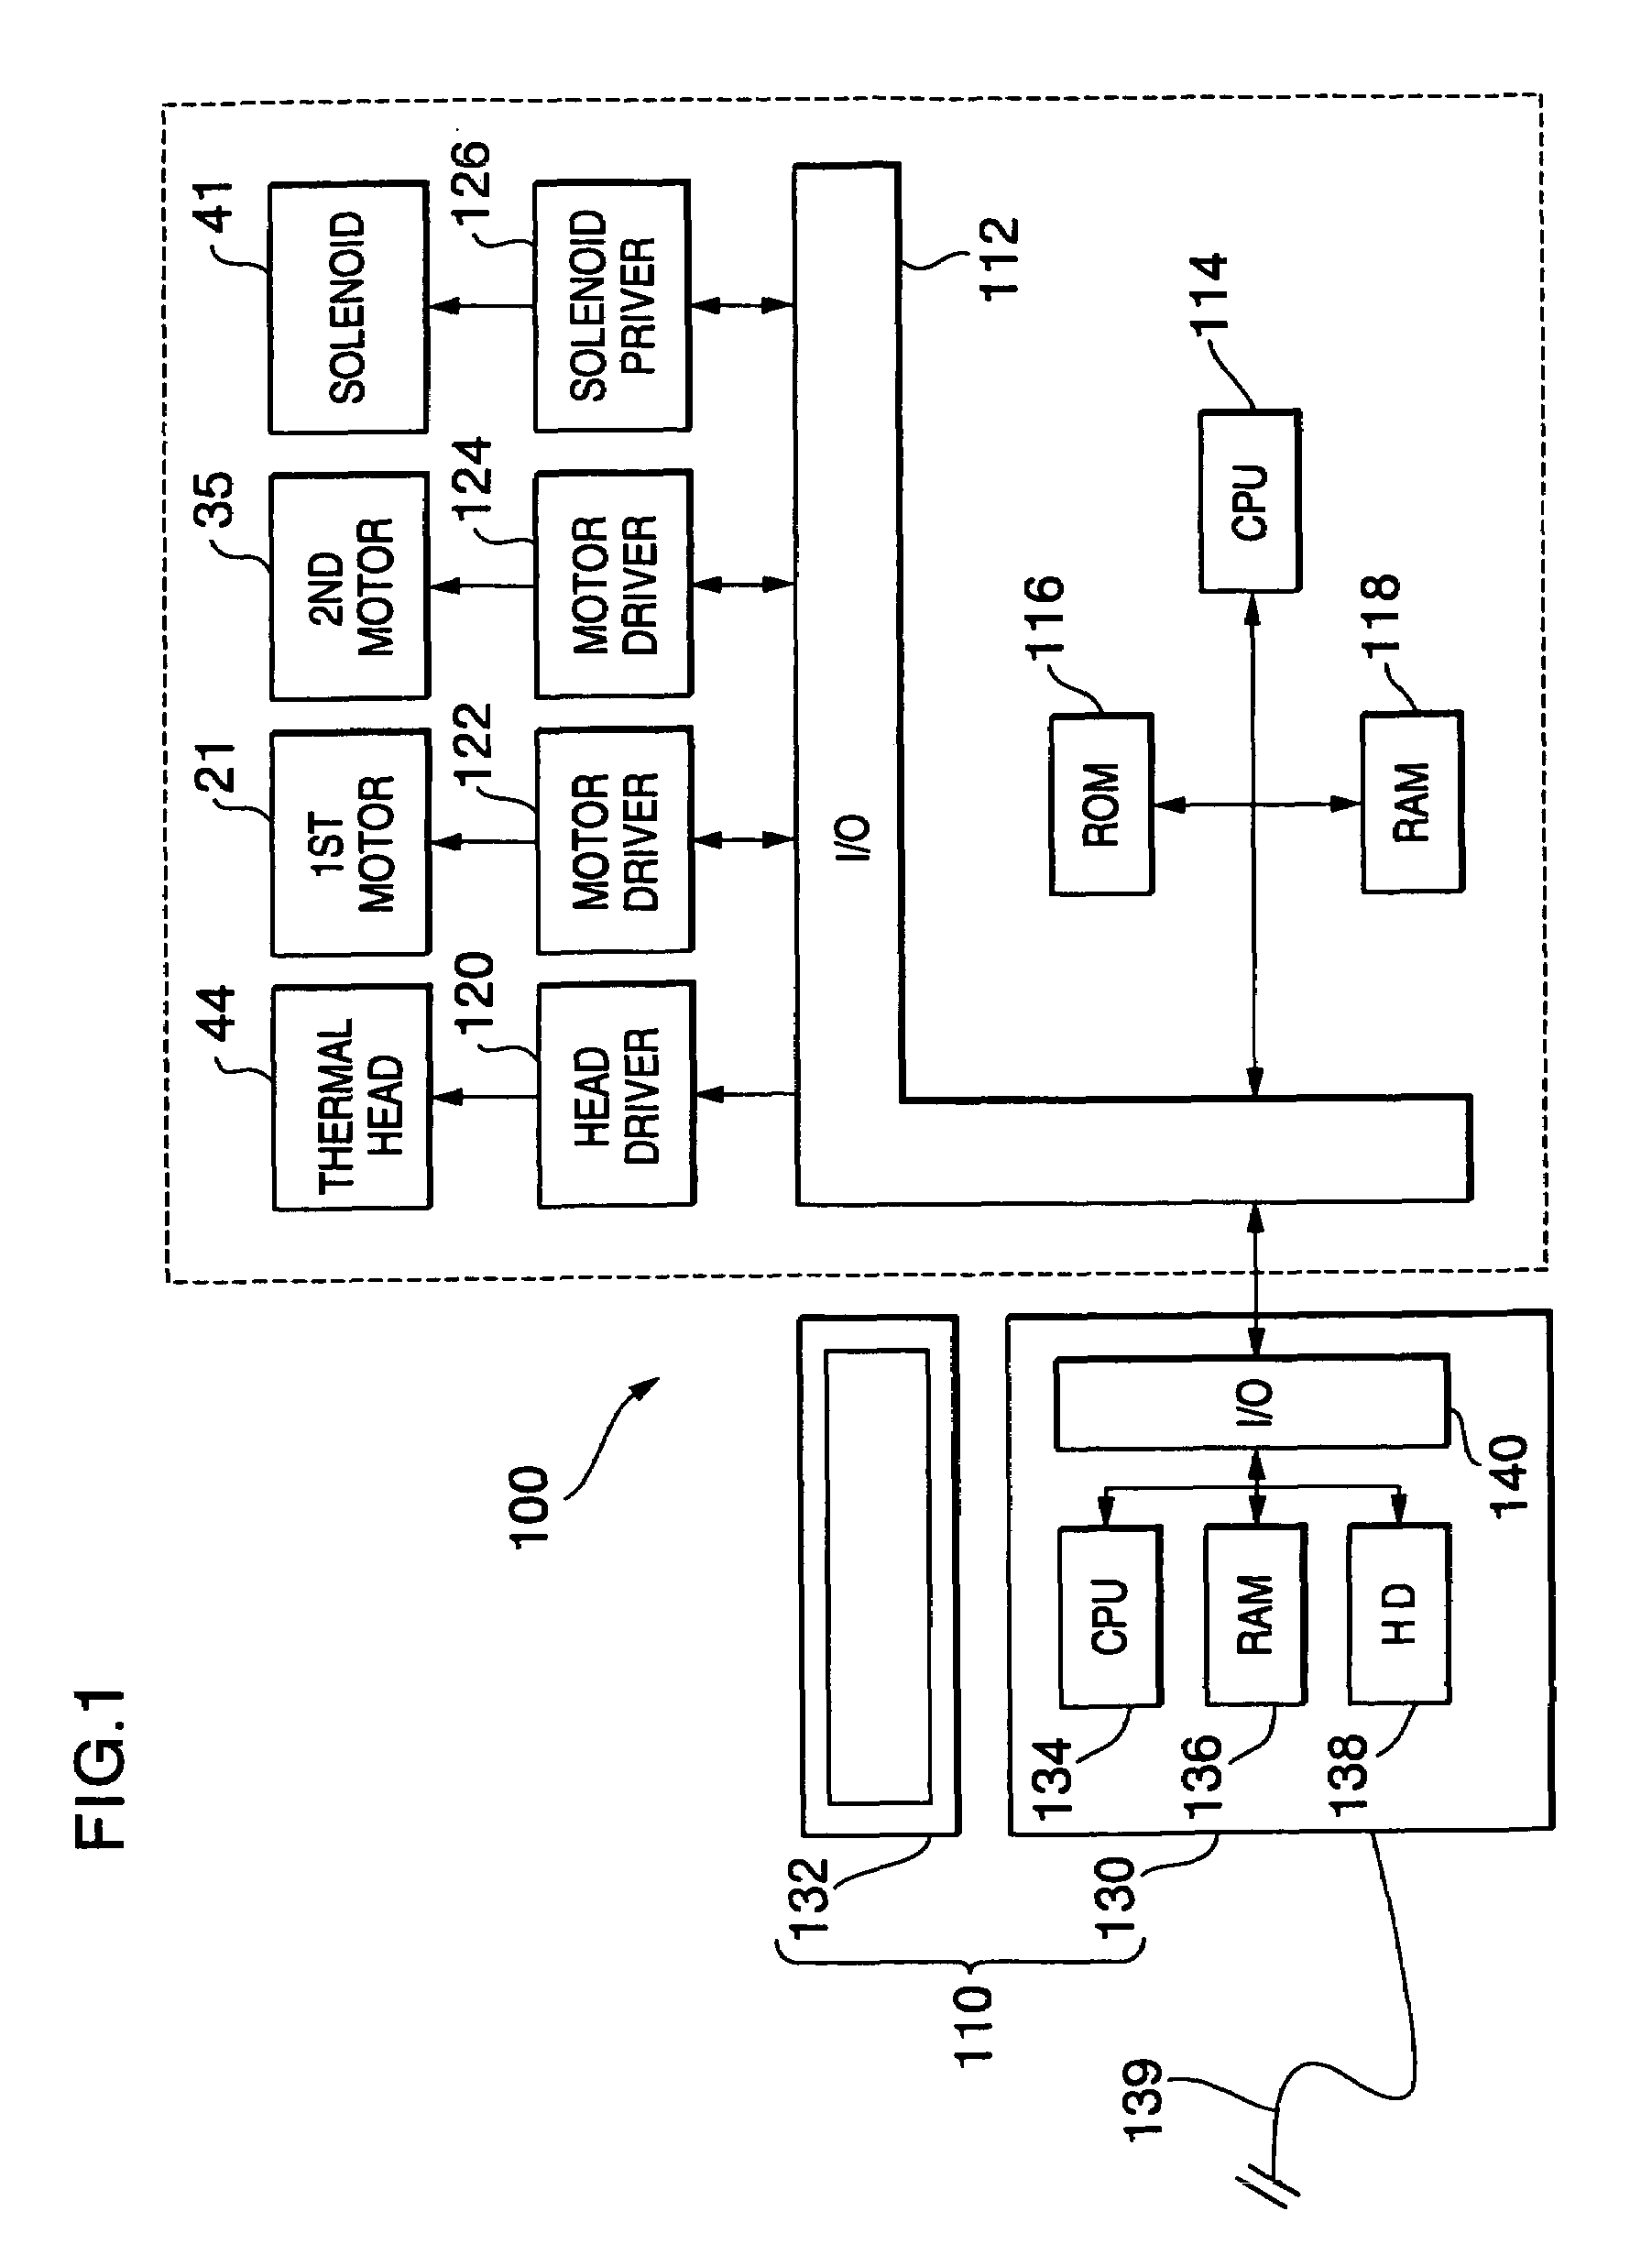 Data processing for arranging text and image data on a substrate